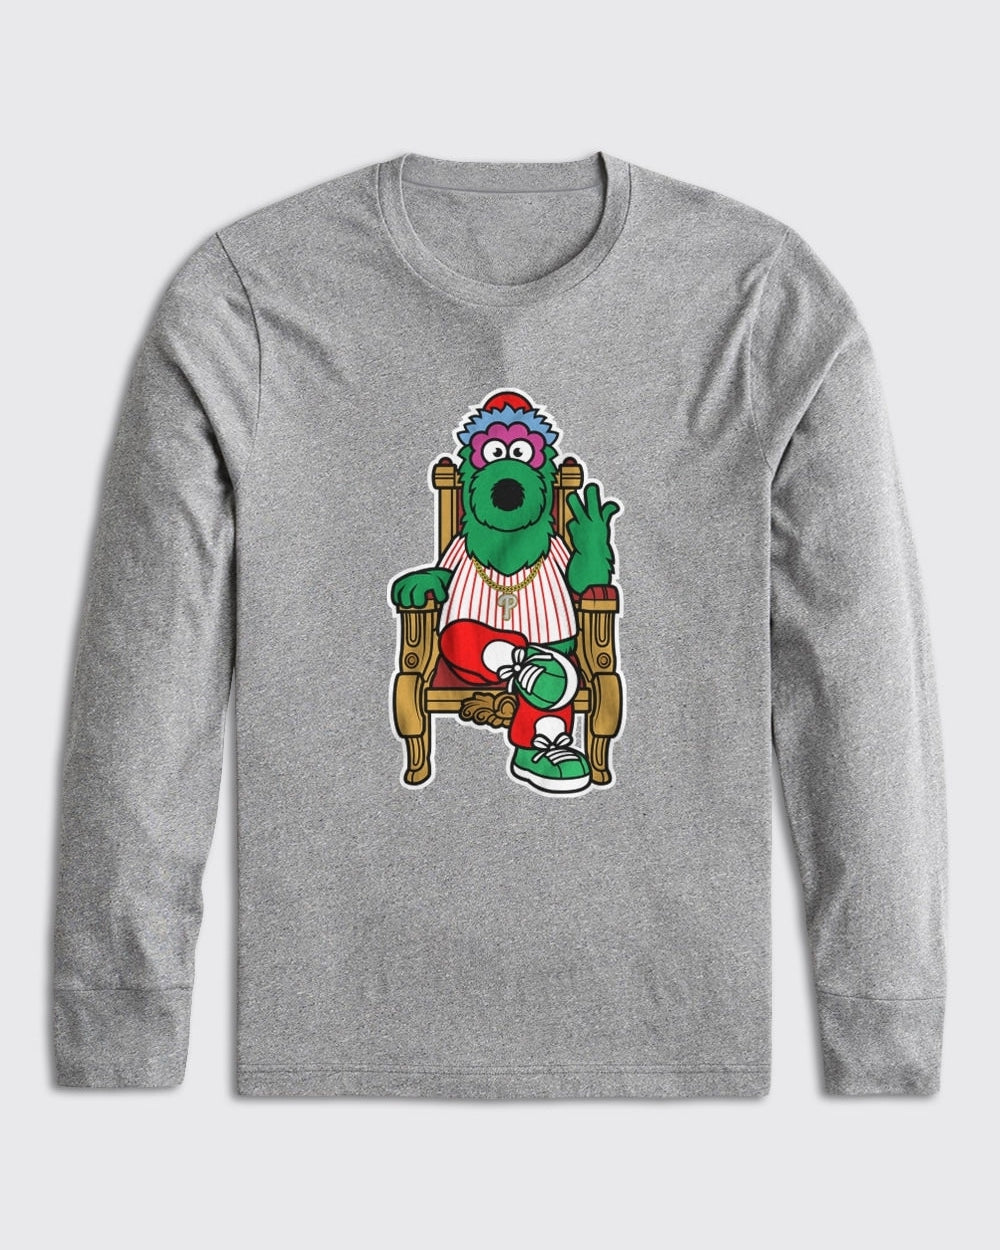 Philly Phan to The Bone Youth Hoodie | Philadelphia Phillies Phanatic Inspired | phillygoat M